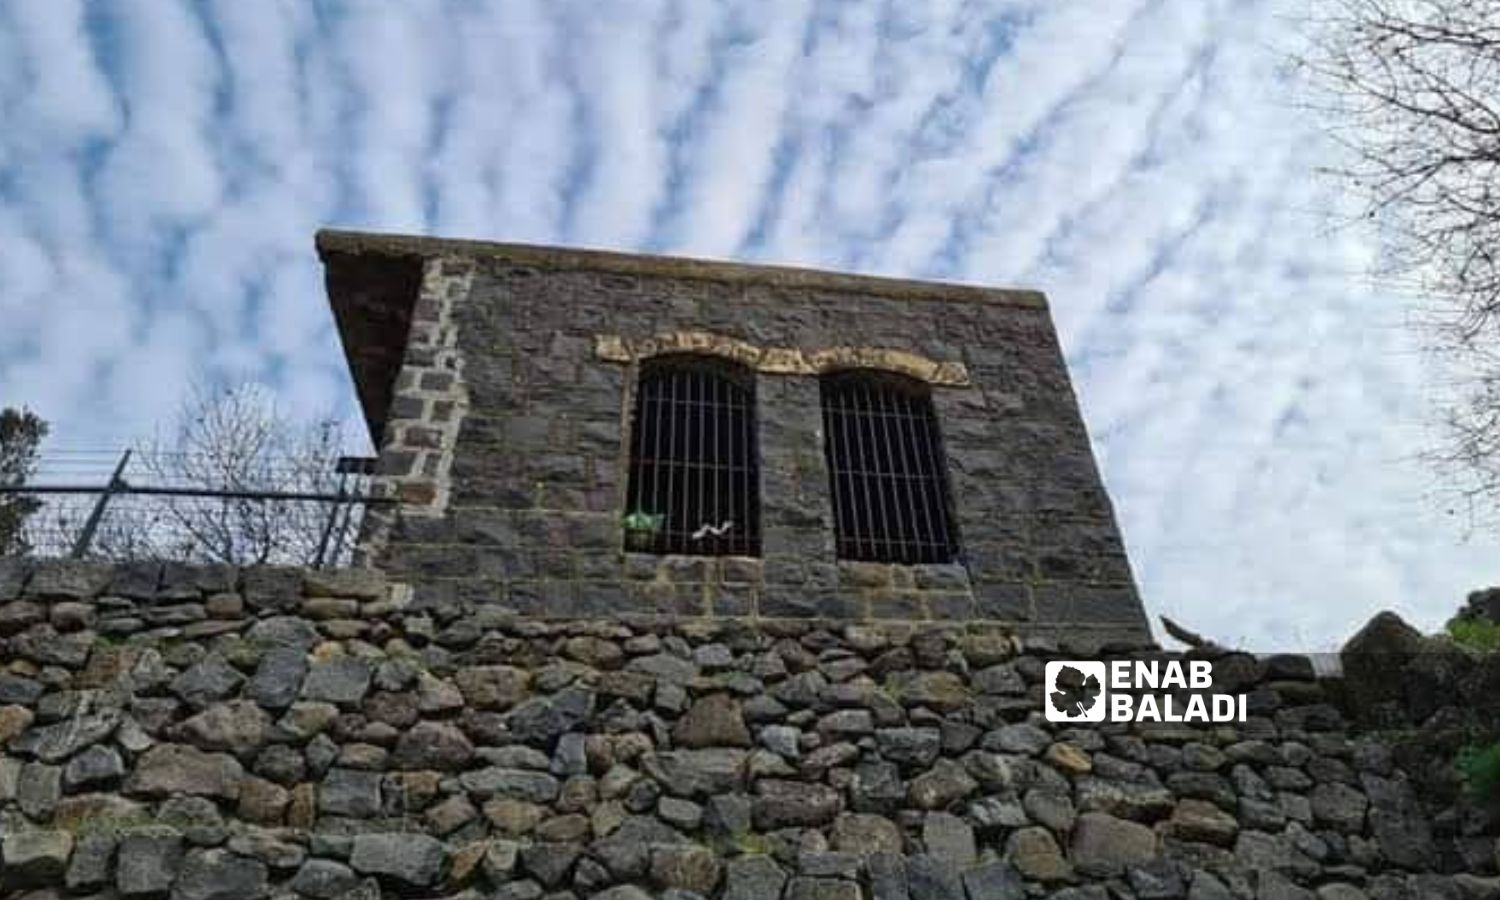 A stone house in Braiqa town in the southern Quneitra governorate (Enab Baladi)